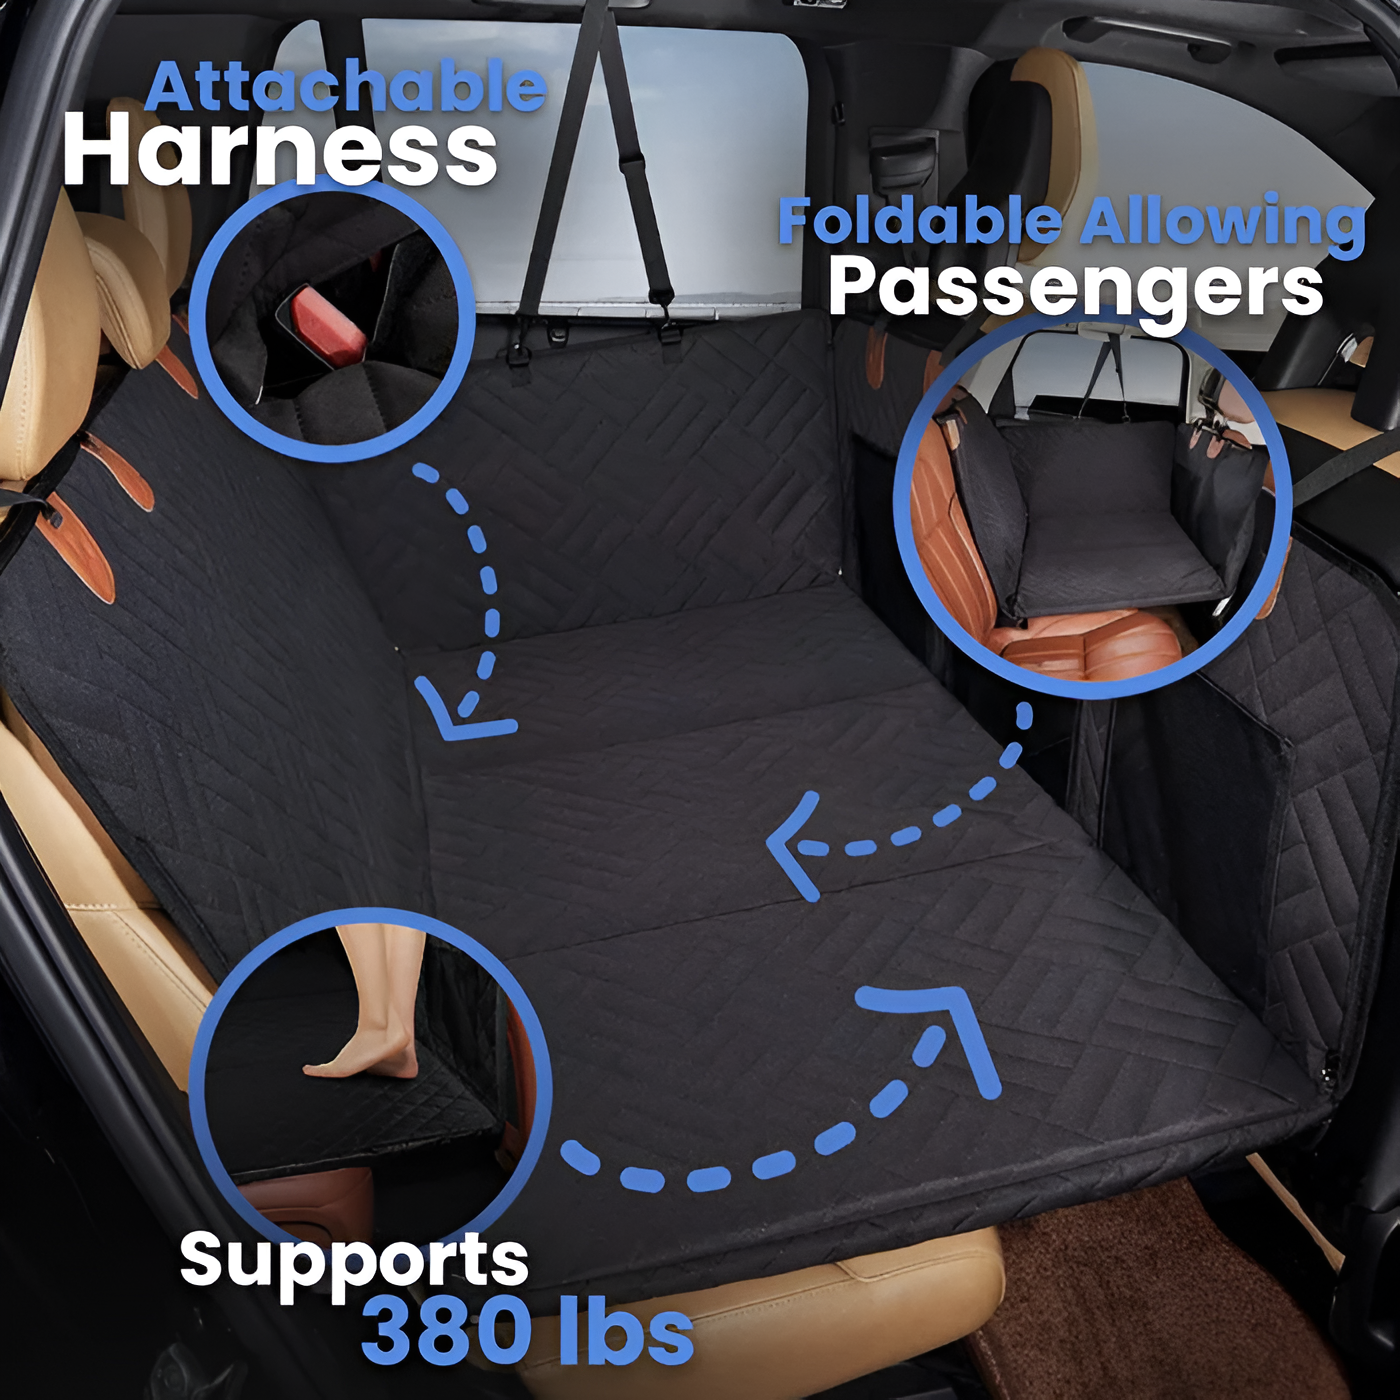 NEW Waterproof Non-Slip Car Seat Hammock Cover With Pockets, Side Flaps, Headrest Straps, Seat-Anchors, & Mesh Window (+FREE SAFETY BELT!)